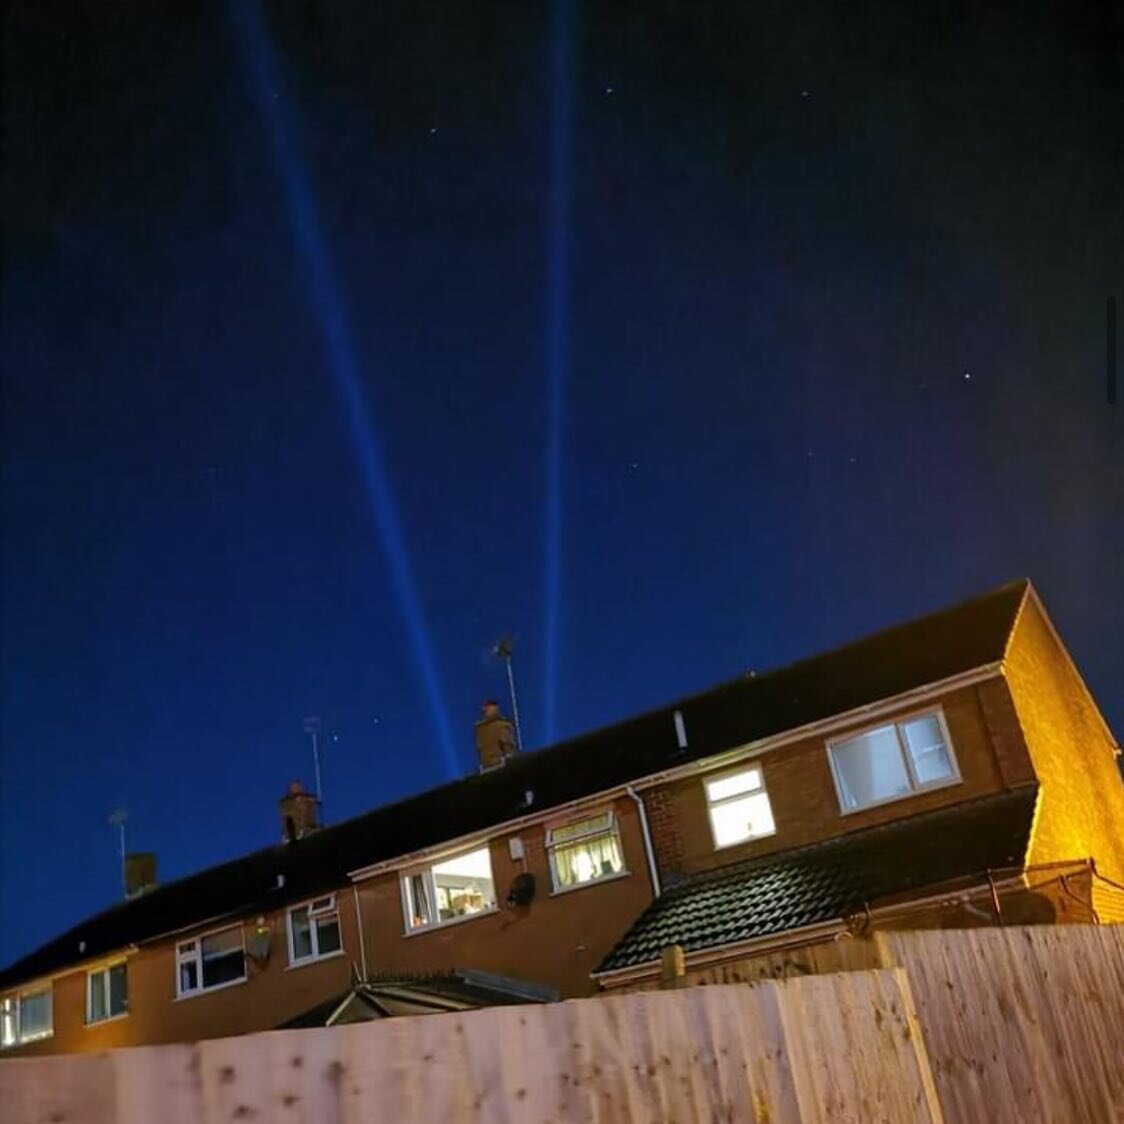 Great picture by one of the community of the space cannons. #exeter #spacecannons #searchlights #batman #stageengage